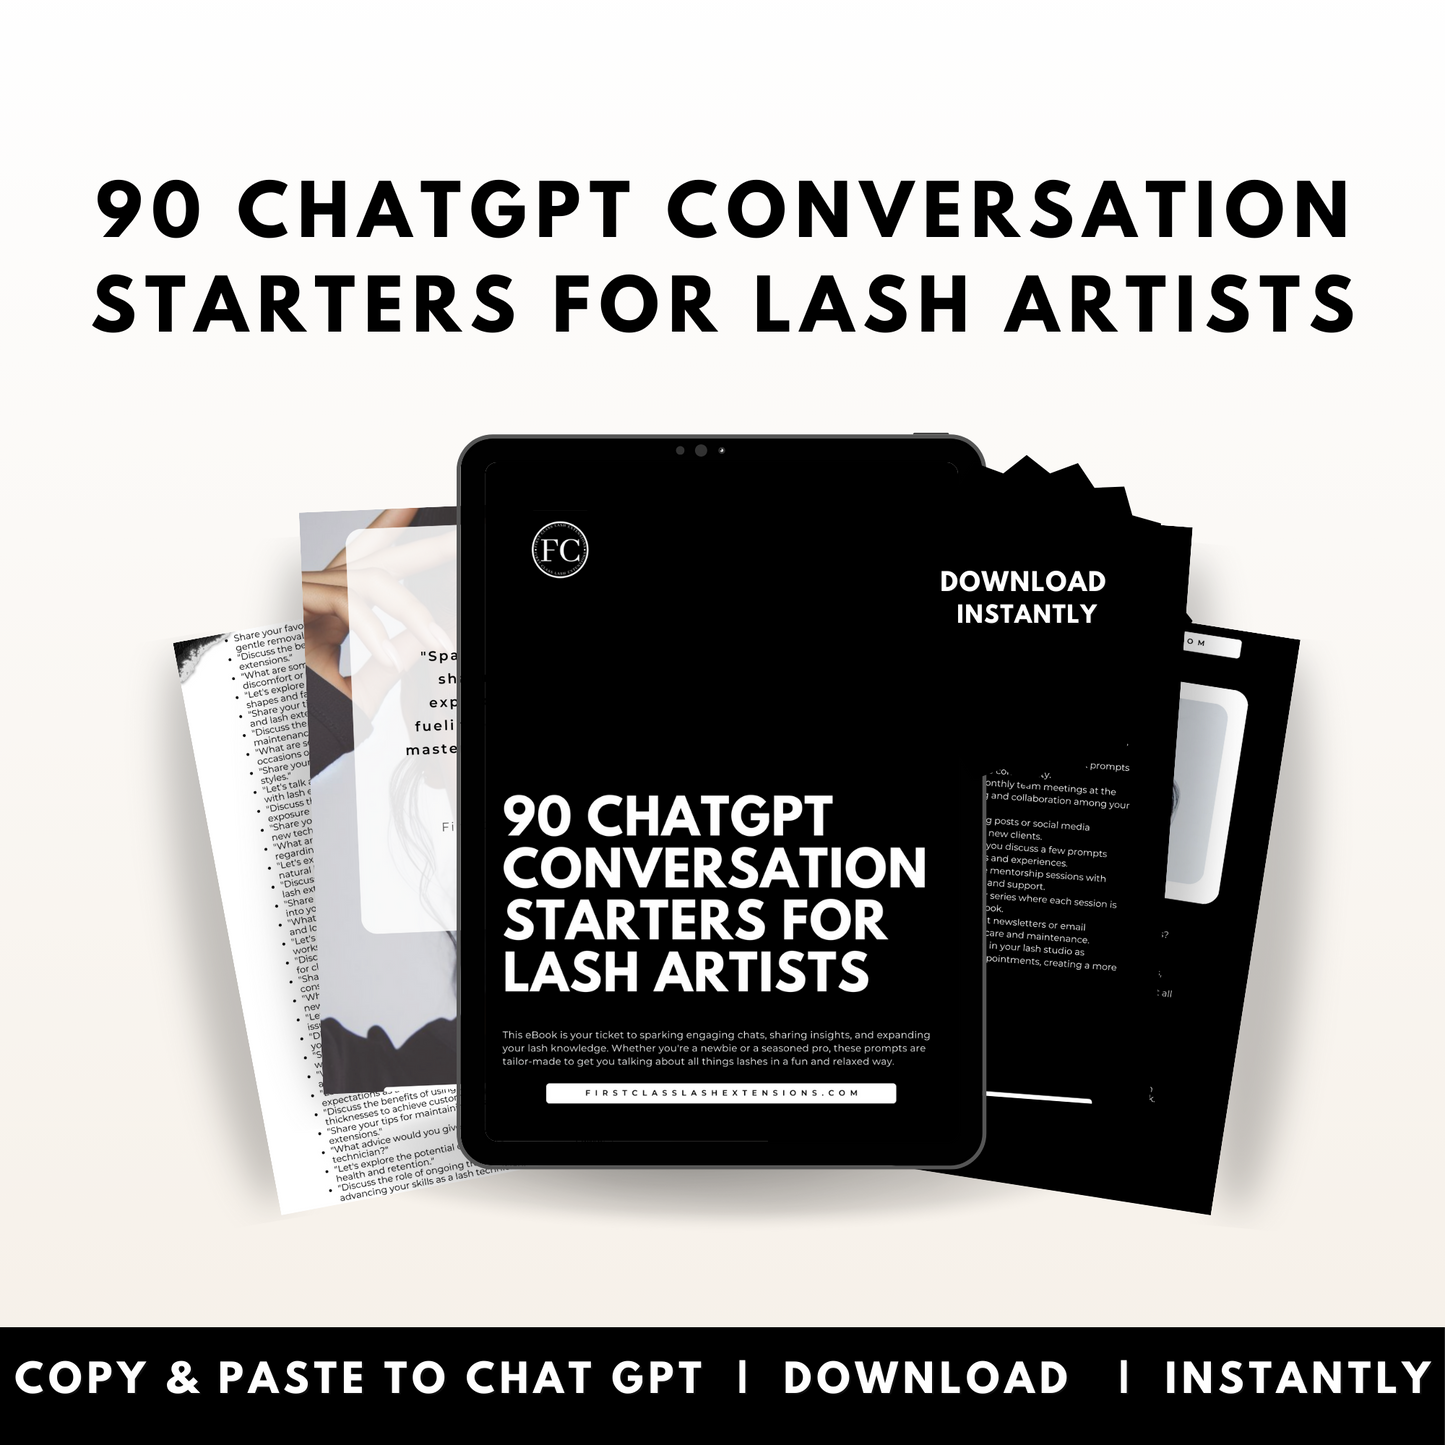 NEW! 90 ChatGPT Conversation Starters for Lash Artists